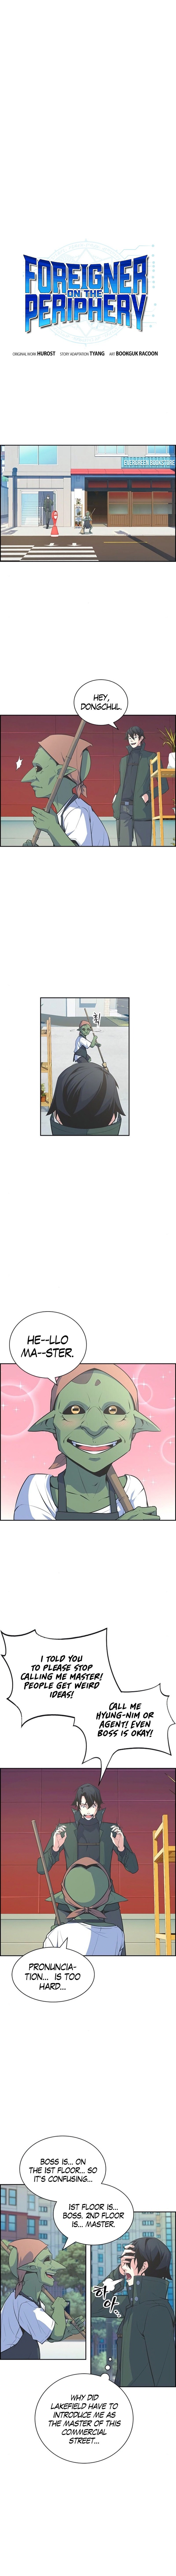 foreigner-on-the-periphery-chap-3-3